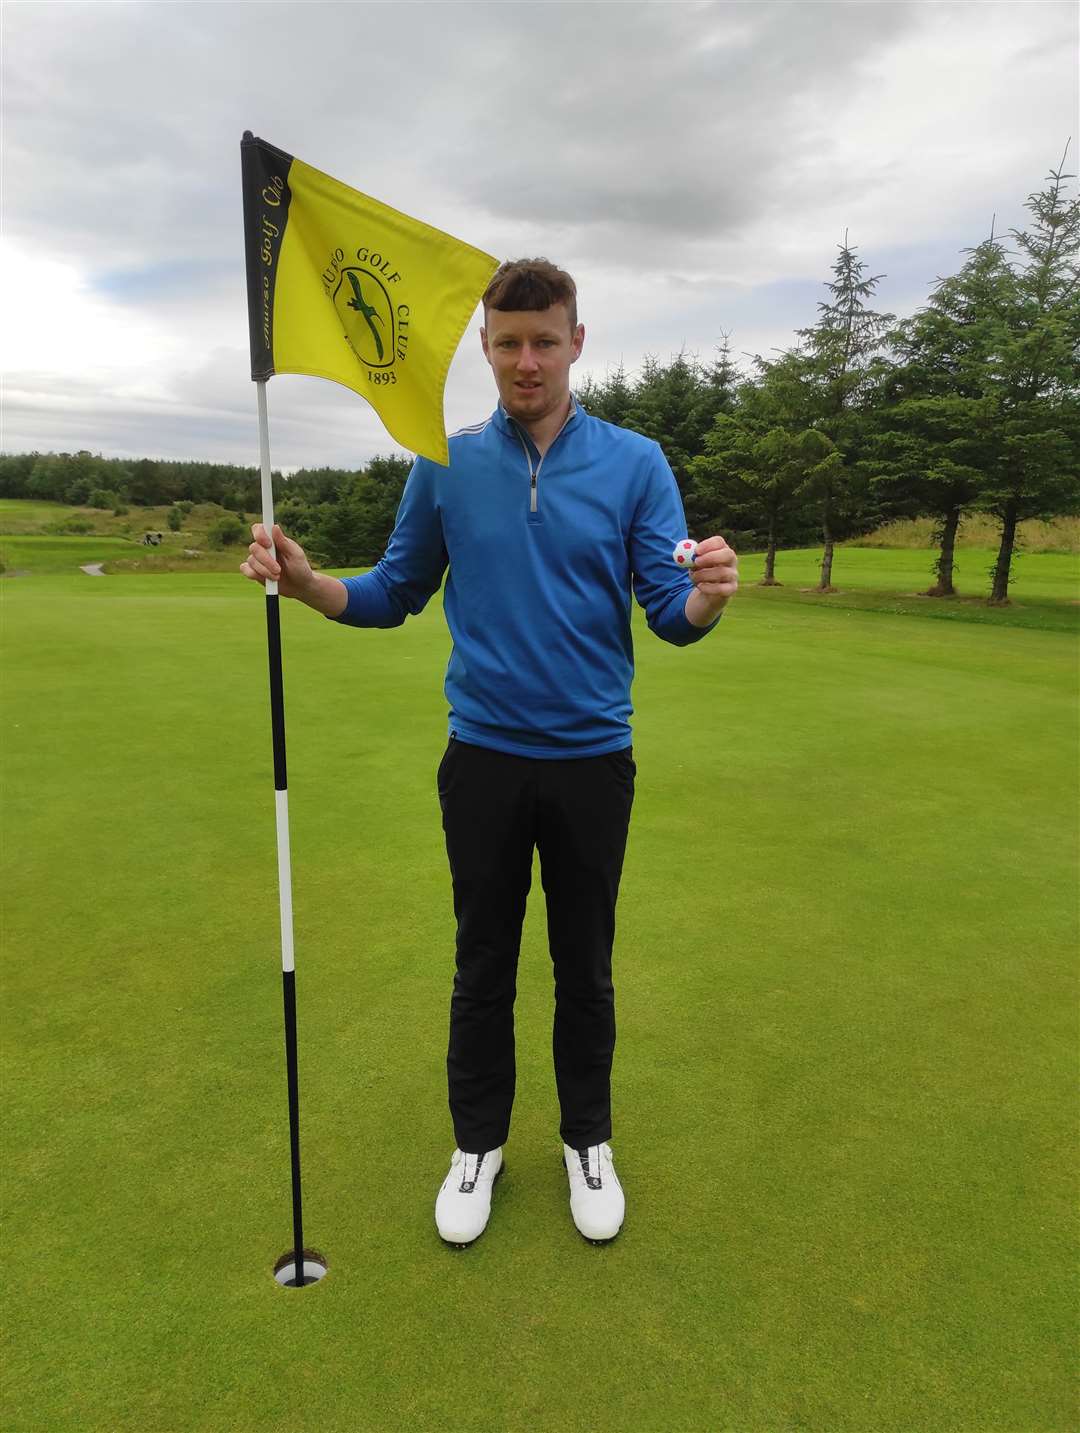 Steven Lowe holed his 6-iron tee shot at the 186-yard third hole during round 10 of Thurso Golf Club's Summer League. It was his first ace. Lowe is pictured here on the ninth green.